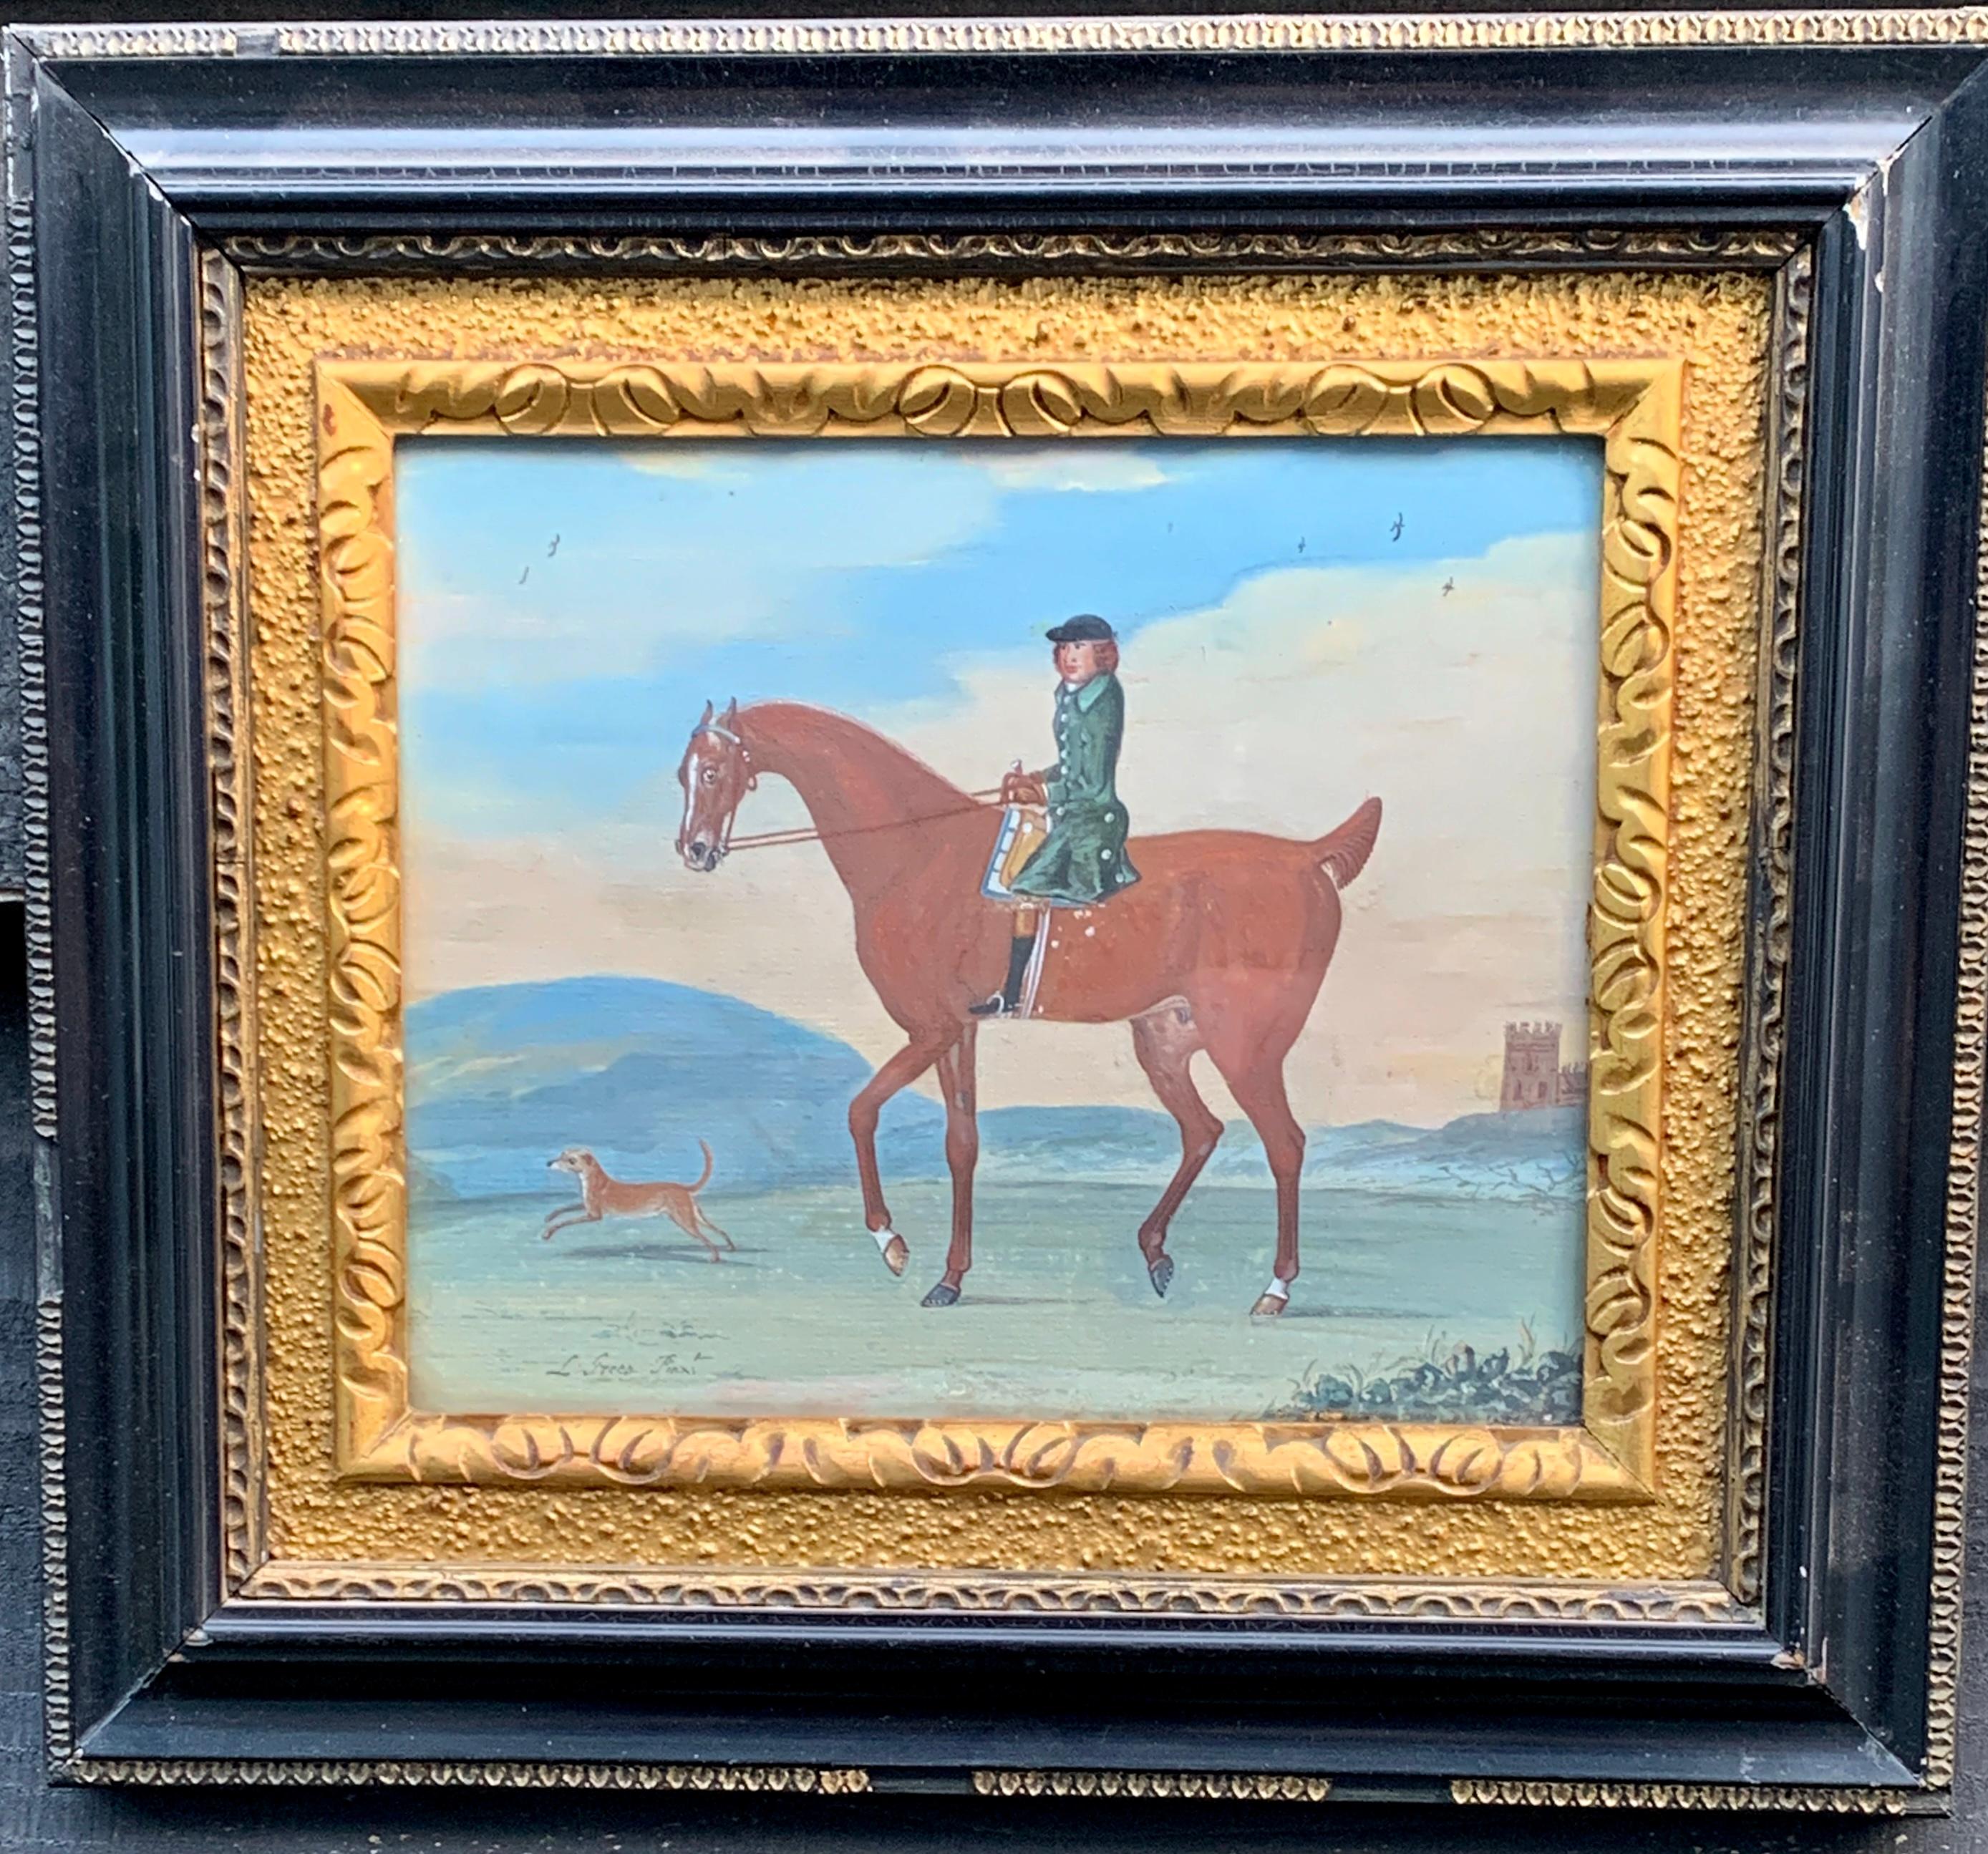 L.Green Animal Art - 18th century English scene of a man on his horse with his dog in a landscape